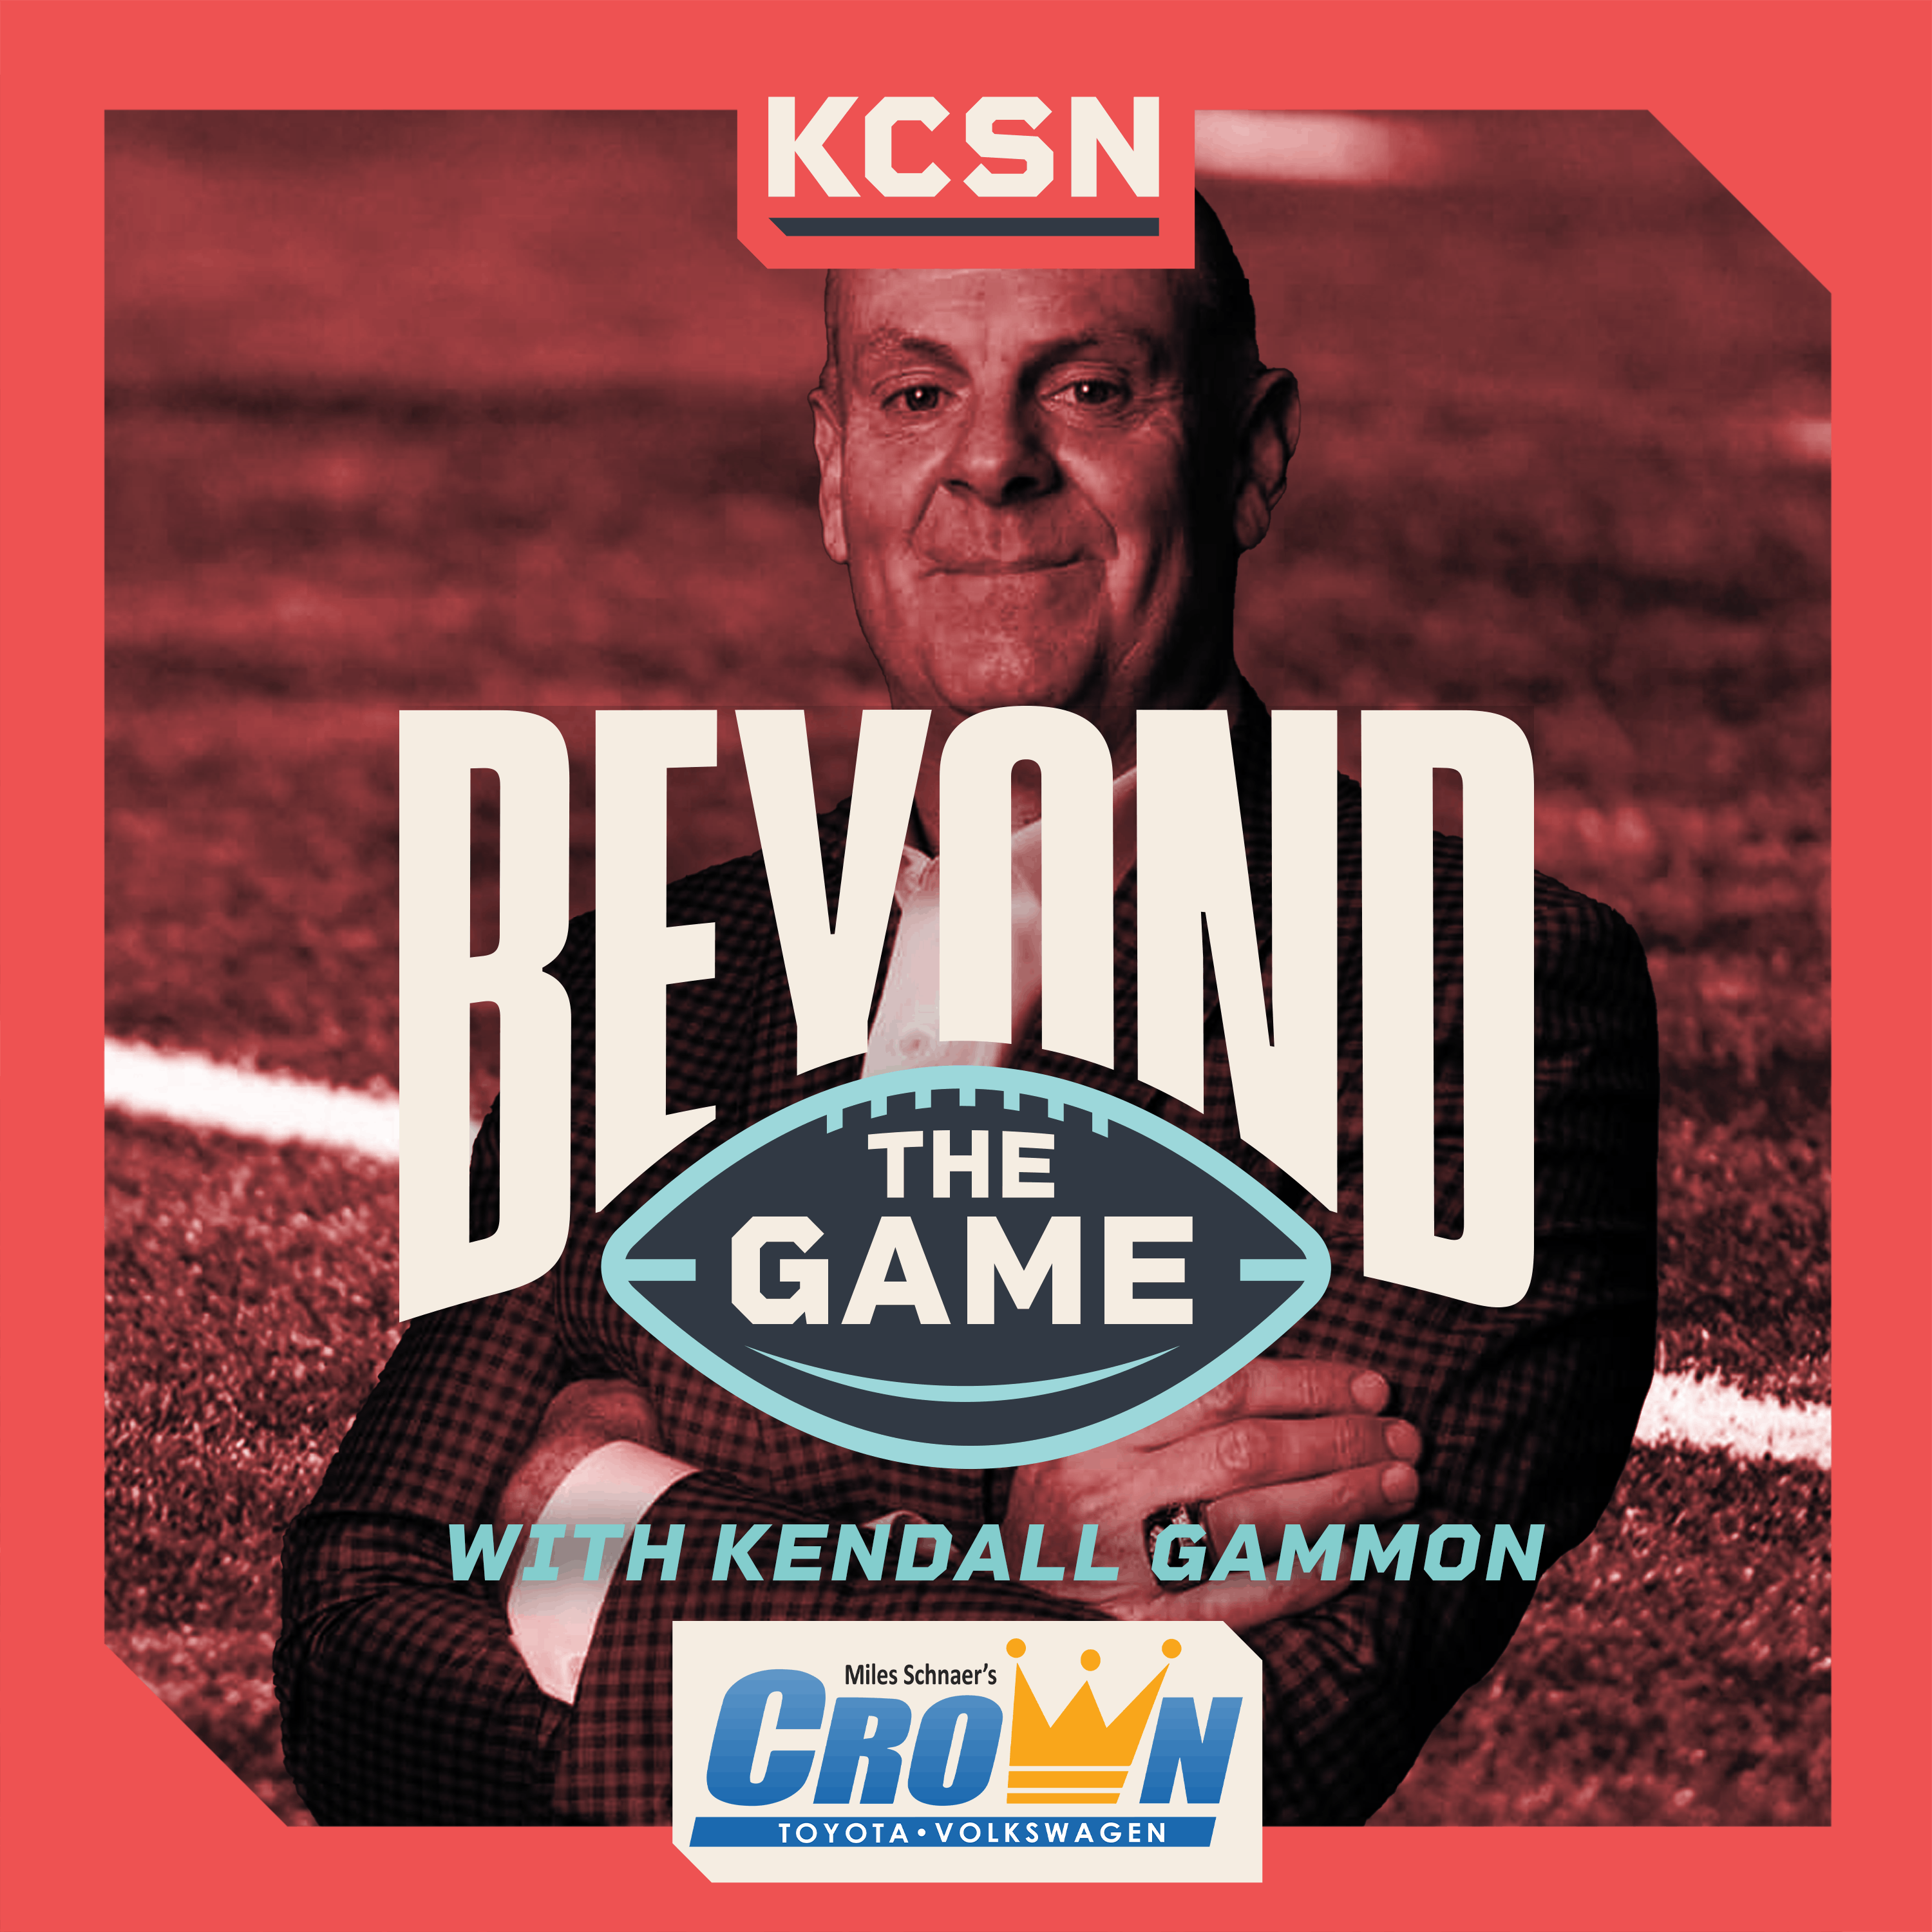 Beyond the Game 4/20: Former Chiefs DE Dave Lindstrom Discusses Football Career, Business Ownership After Football